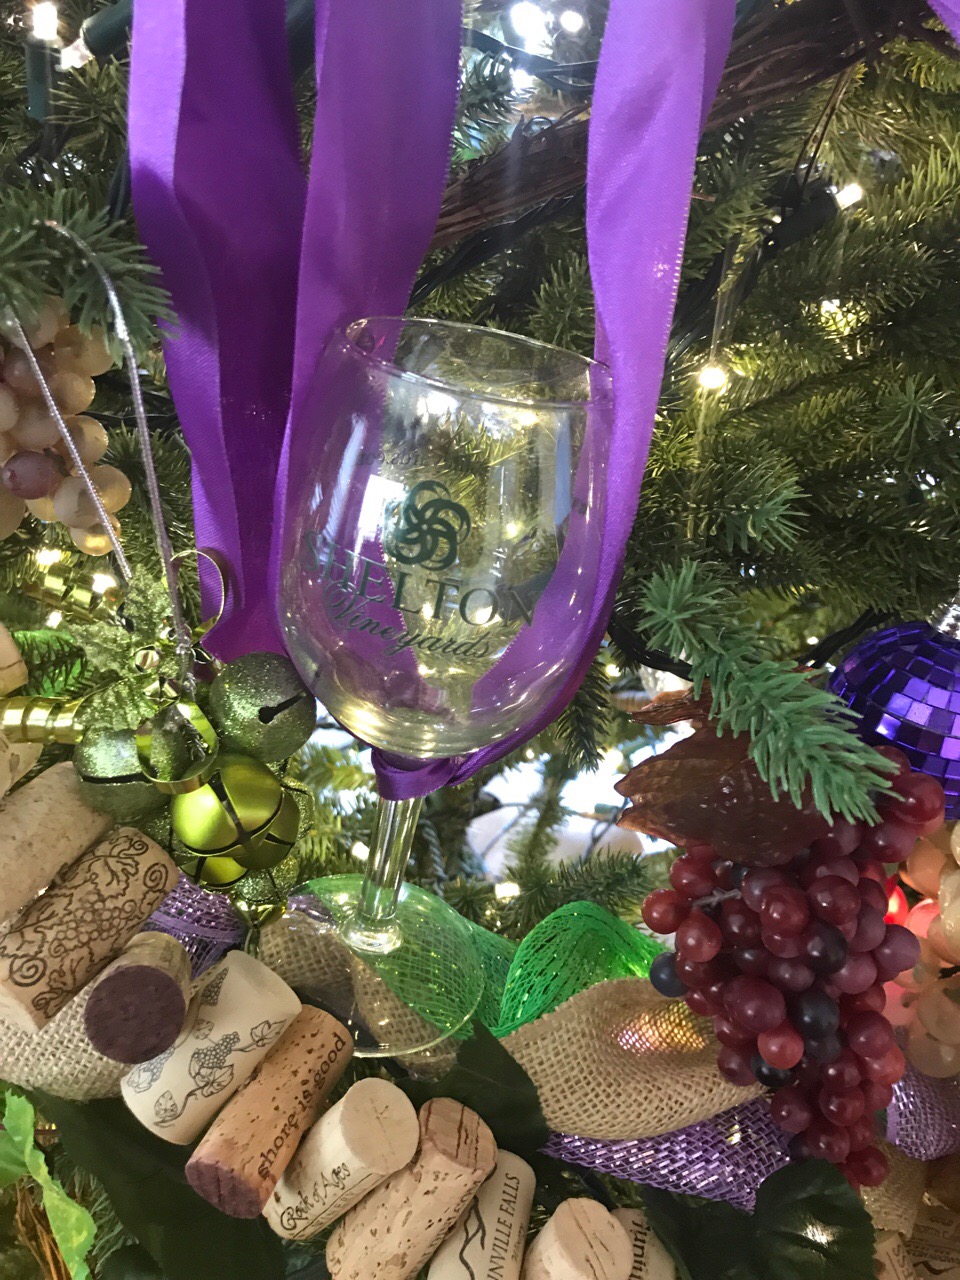 North Carolina Wines for Your 2017 Holiday Table